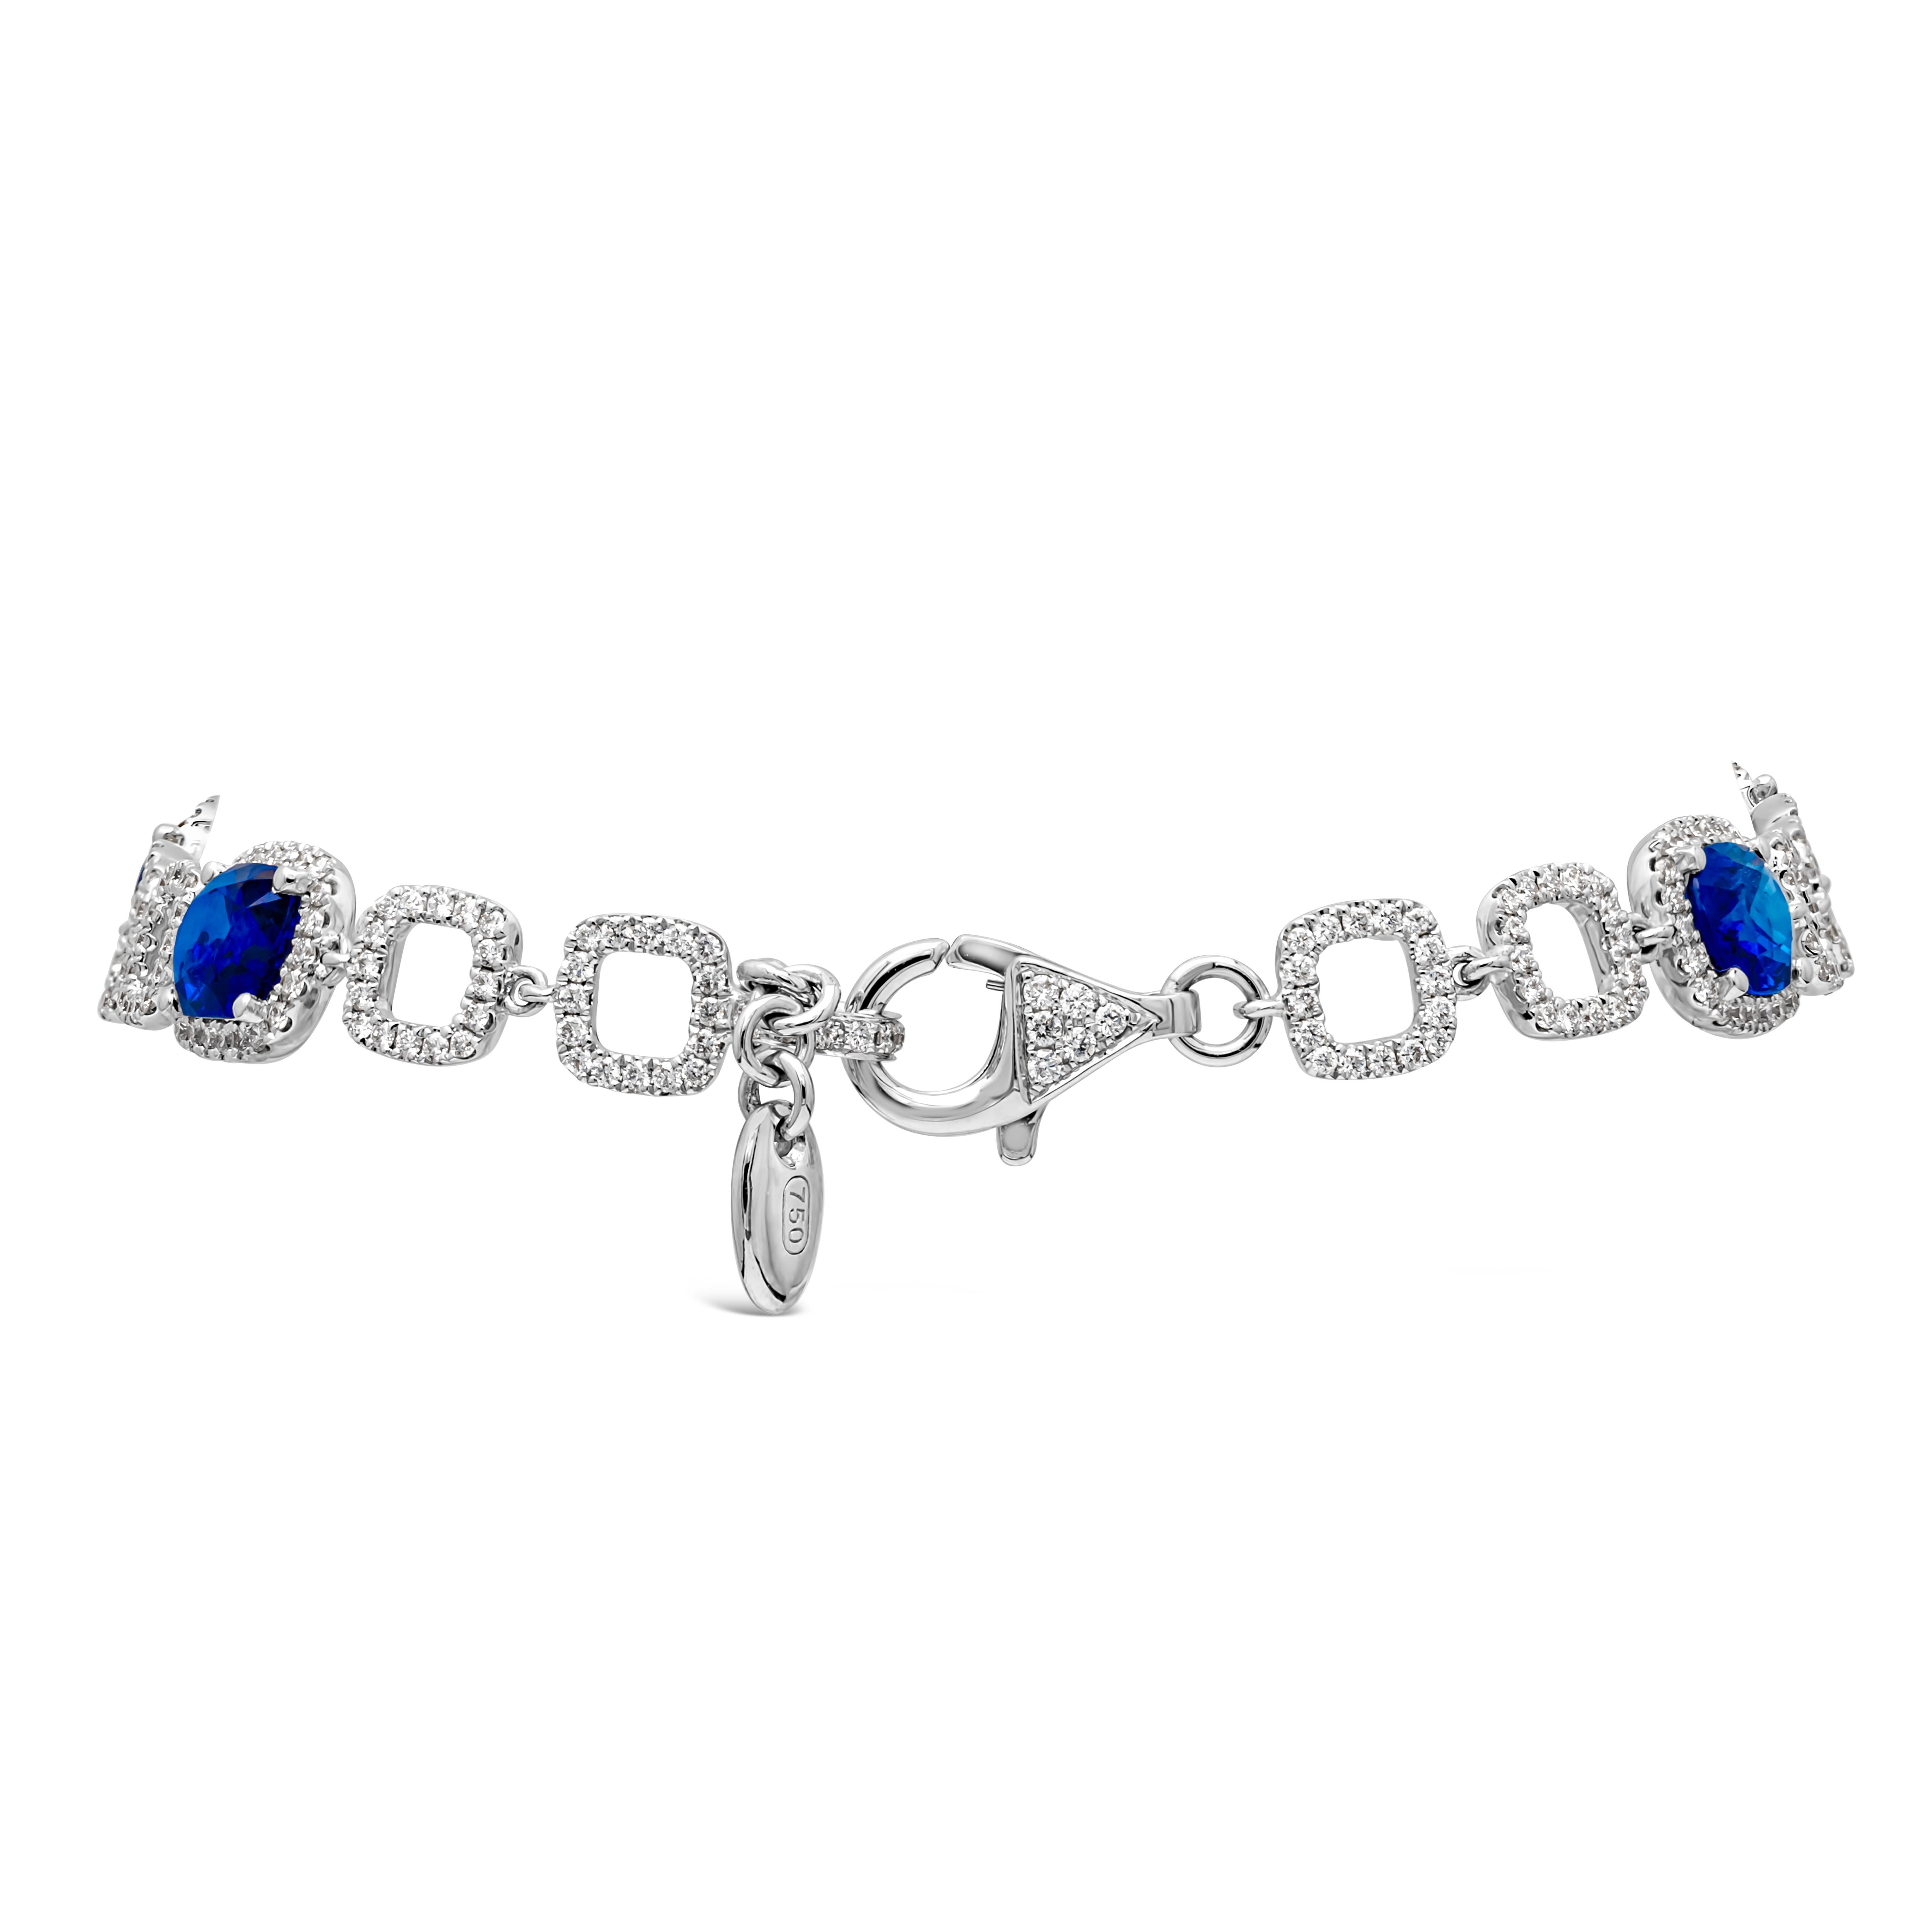 Roman Malakov 5.09 Carats Cushion Cut Sapphire with Diamond Tennis Bracelet In New Condition For Sale In New York, NY